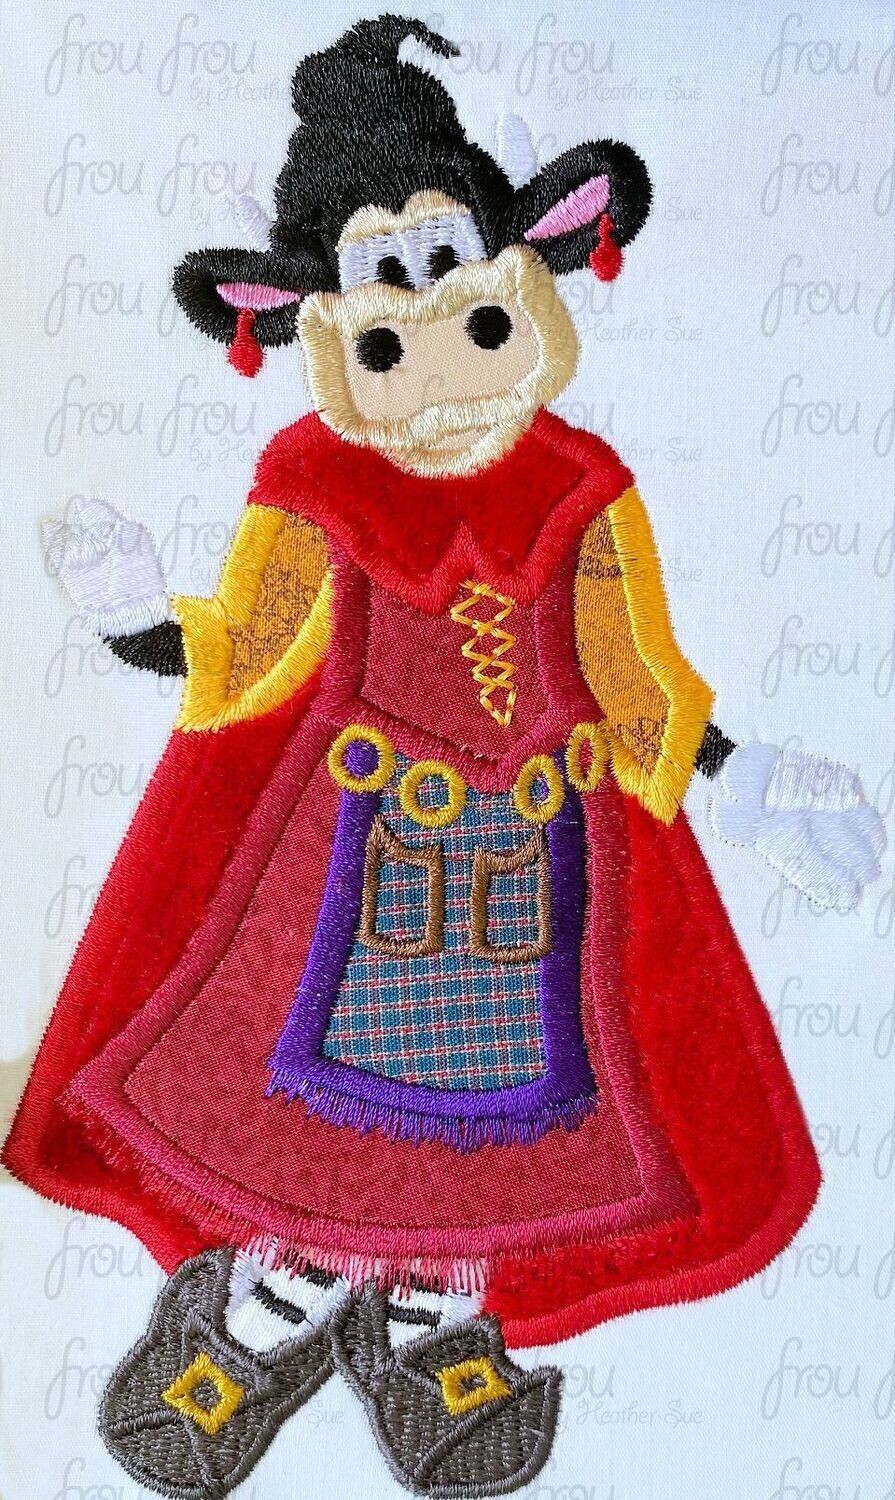 Clara Cow dressed as Marie Sand Sister Hokus Pokus Halloween Machine Applique Embroidery Design, multiple sizes, including 4